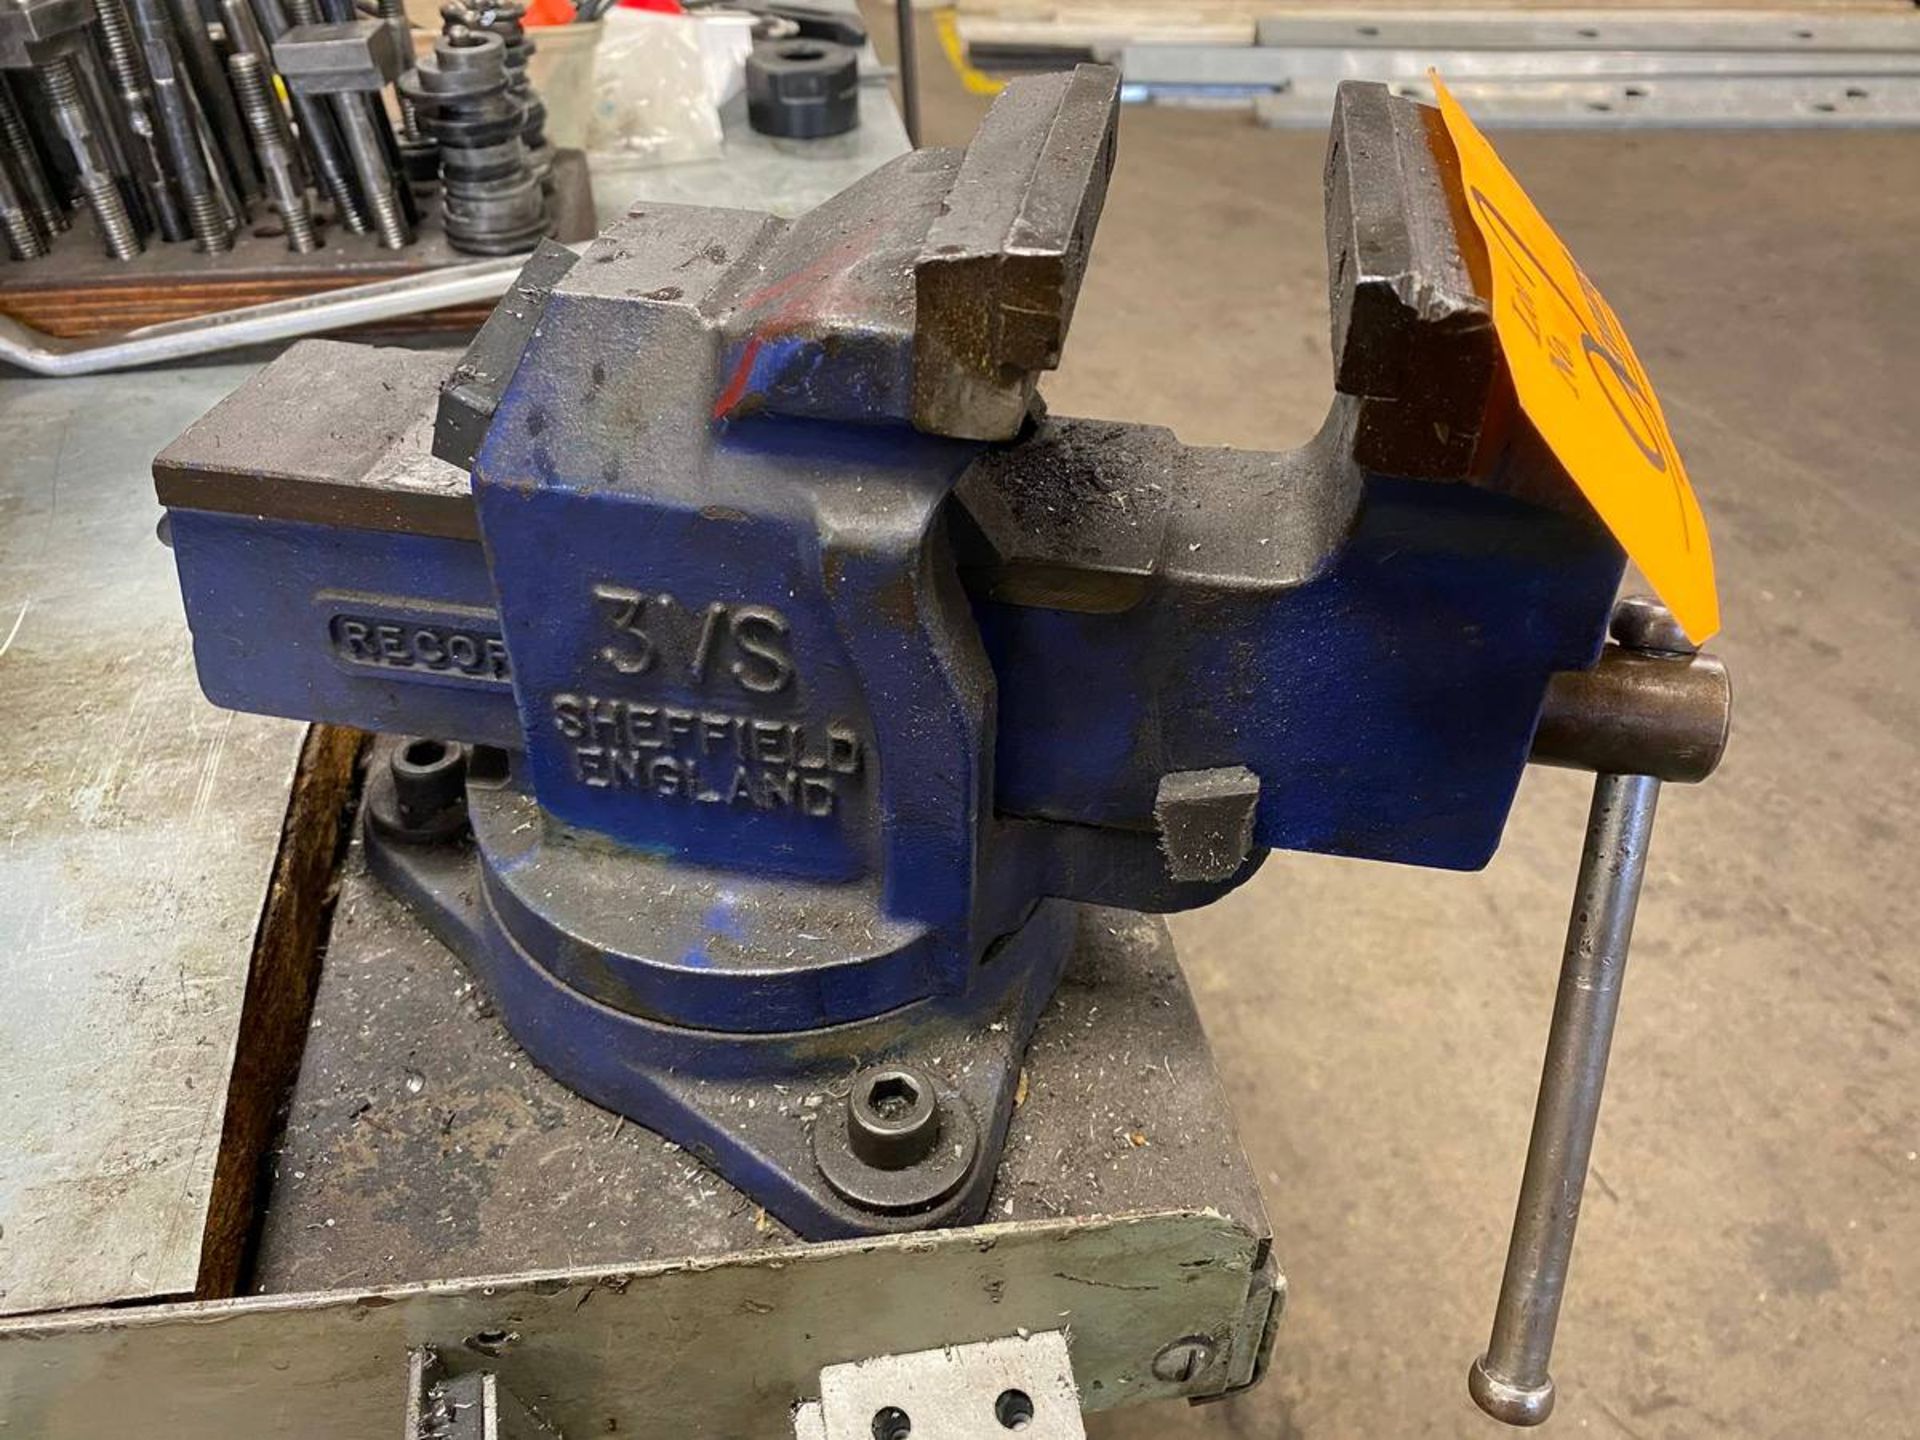 Sheffield England 3VS 4'' Bench Vise Mounted To WorkStation - Image 2 of 2